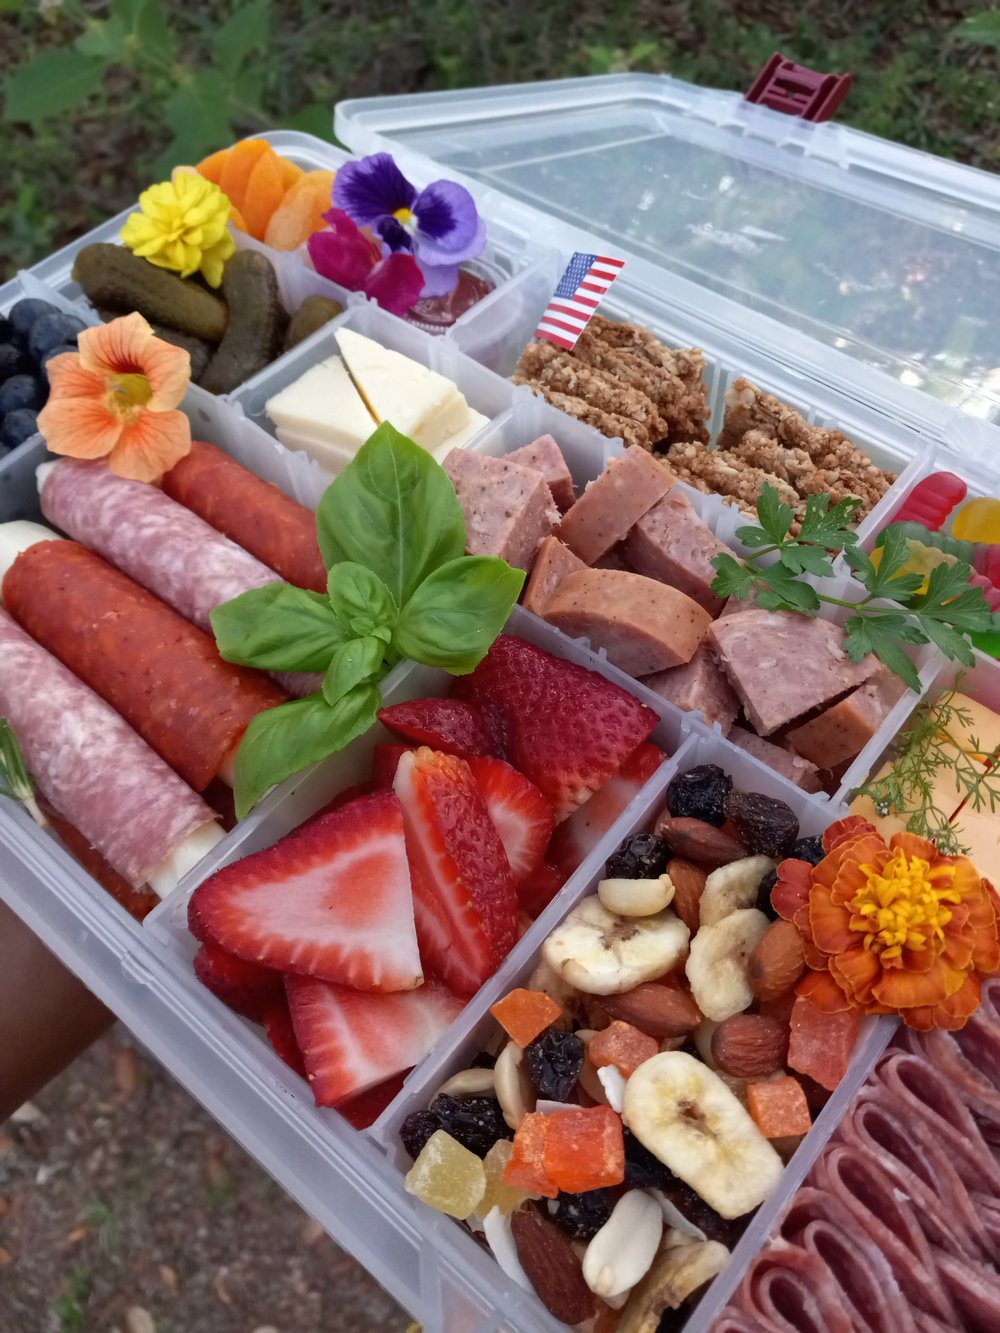 Best snackle box ideas for your next picnic - Entertaining + Style